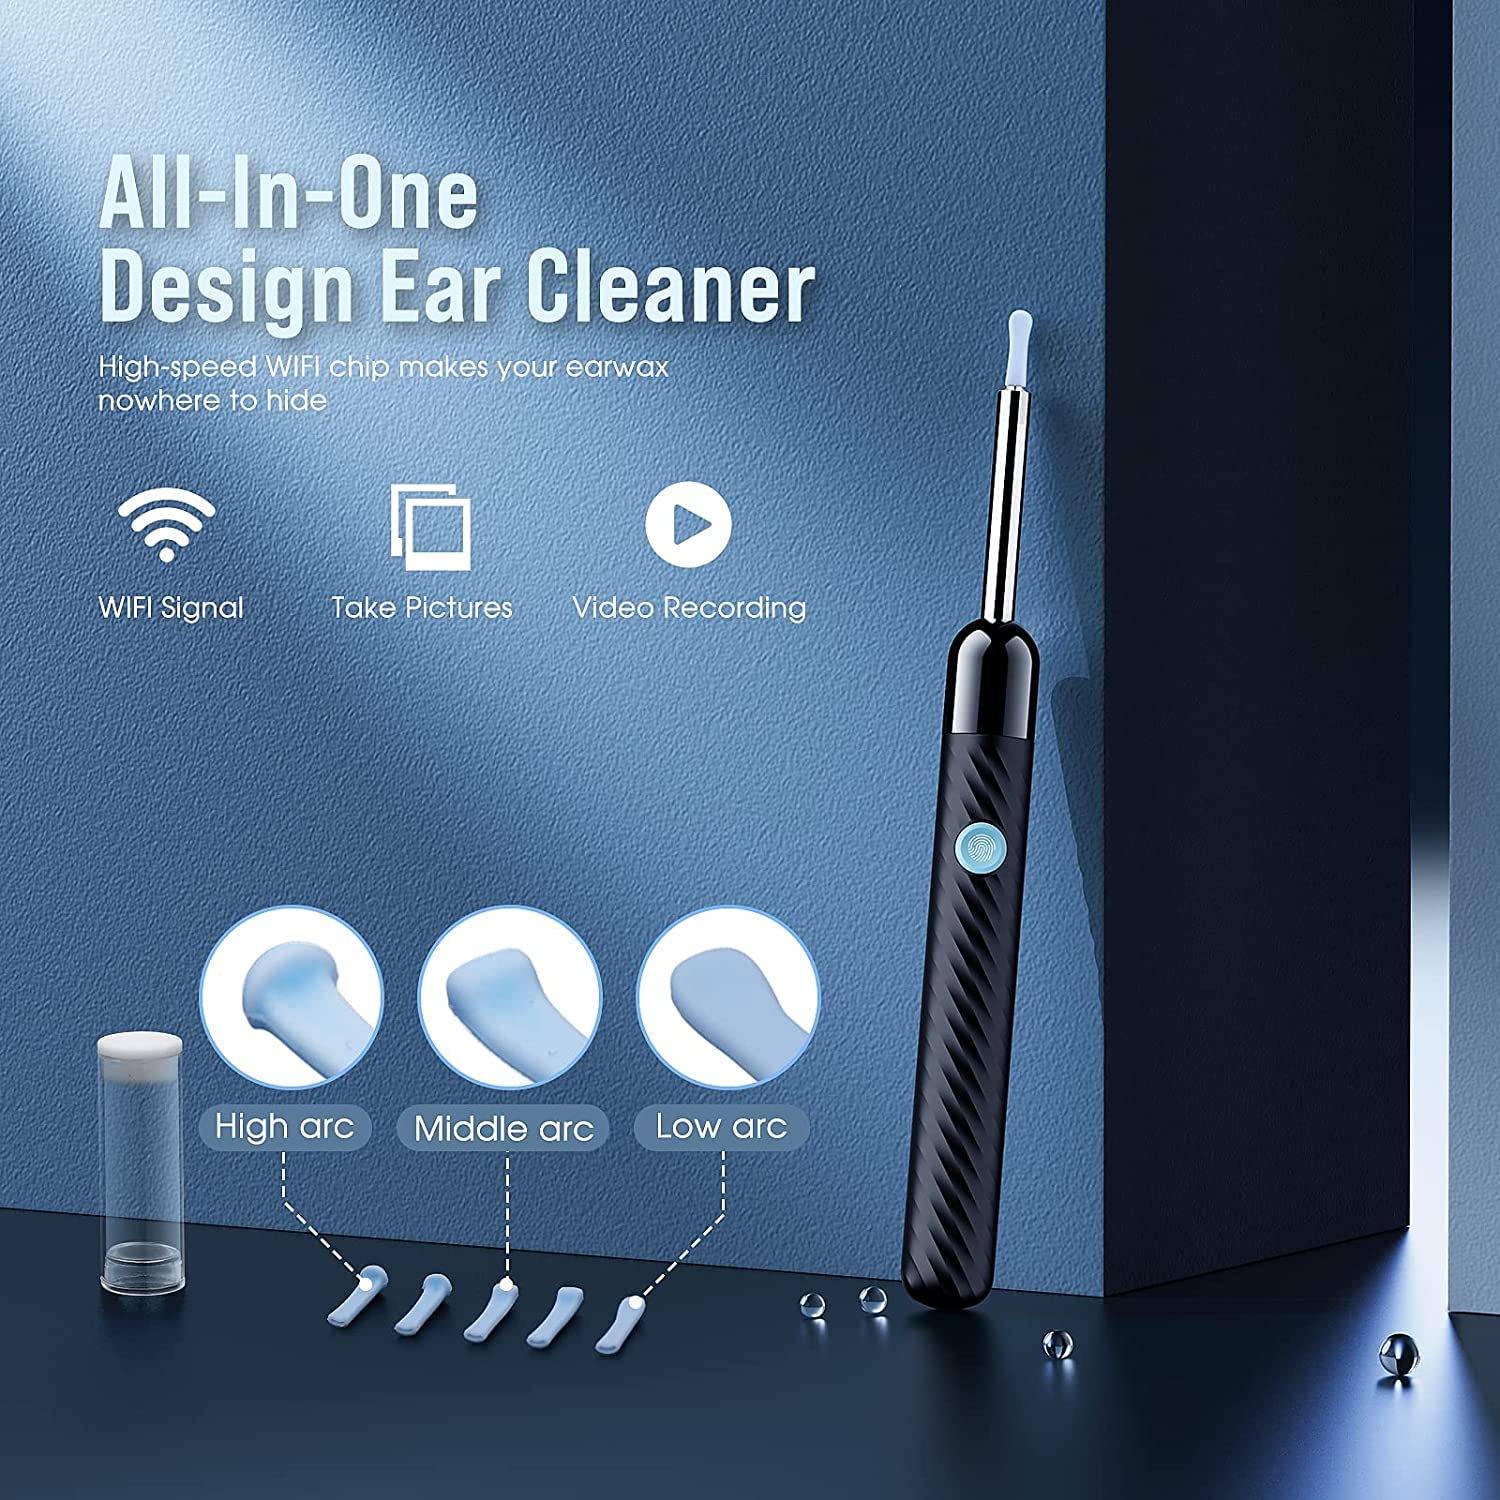 Ear Wax Removal - Earwax Remover Tool with 8 Pcs Ear Set - Ear Cleaner with Camera - Earwax Removal Kit with Light - Ear Camera with 6 Ear Spoon - Ear Cleaner for iOS & Android (Black)